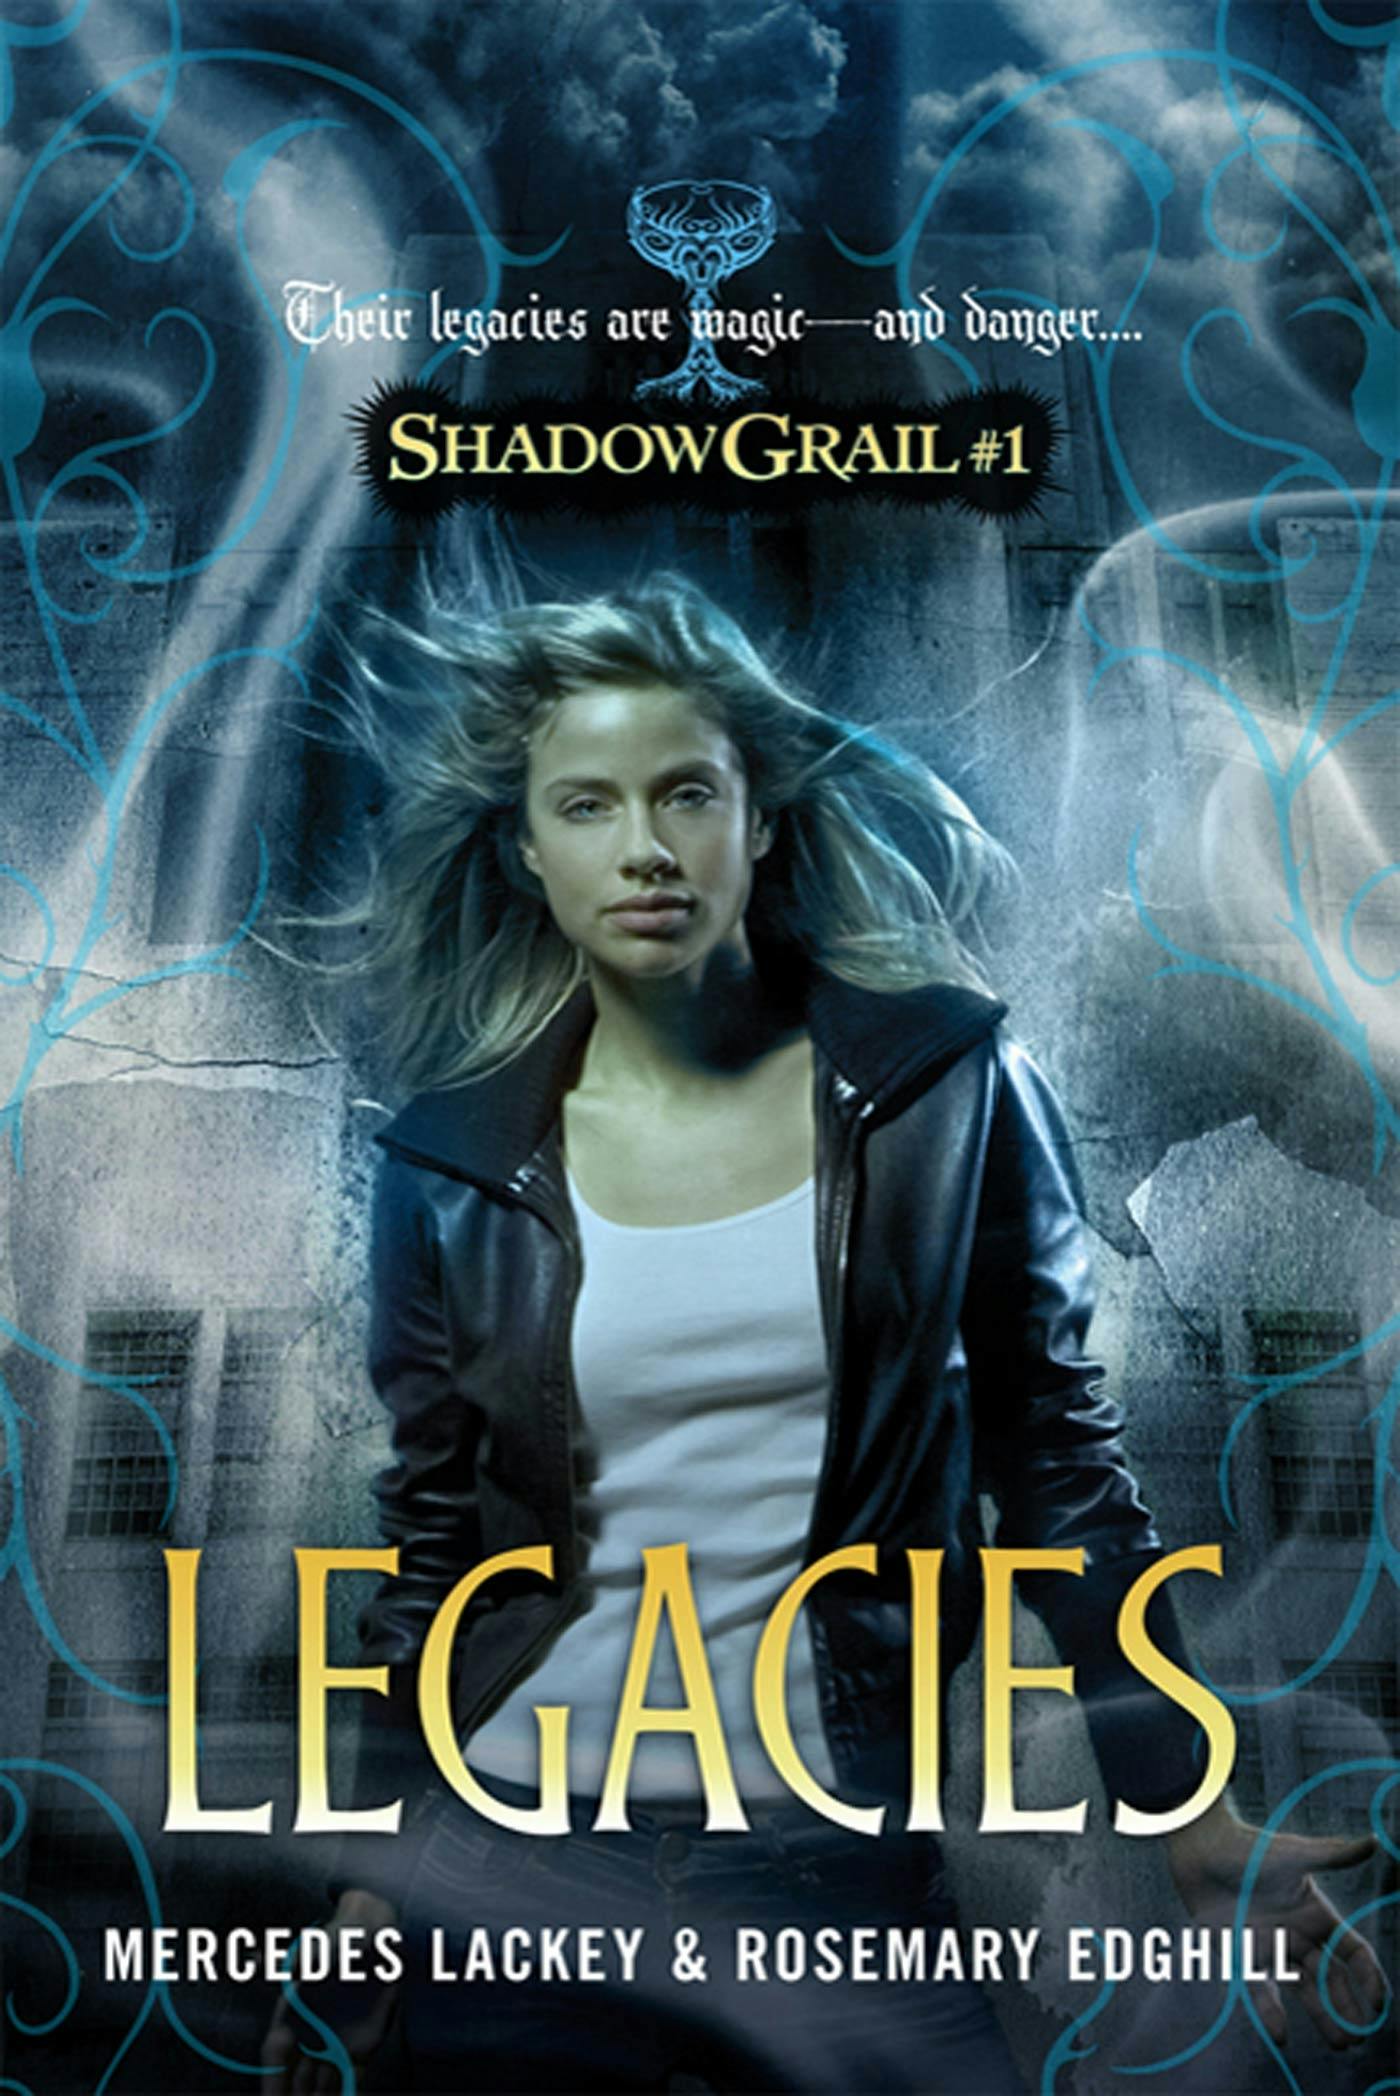 Cover for the book titled as: Shadow Grail #1: Legacies